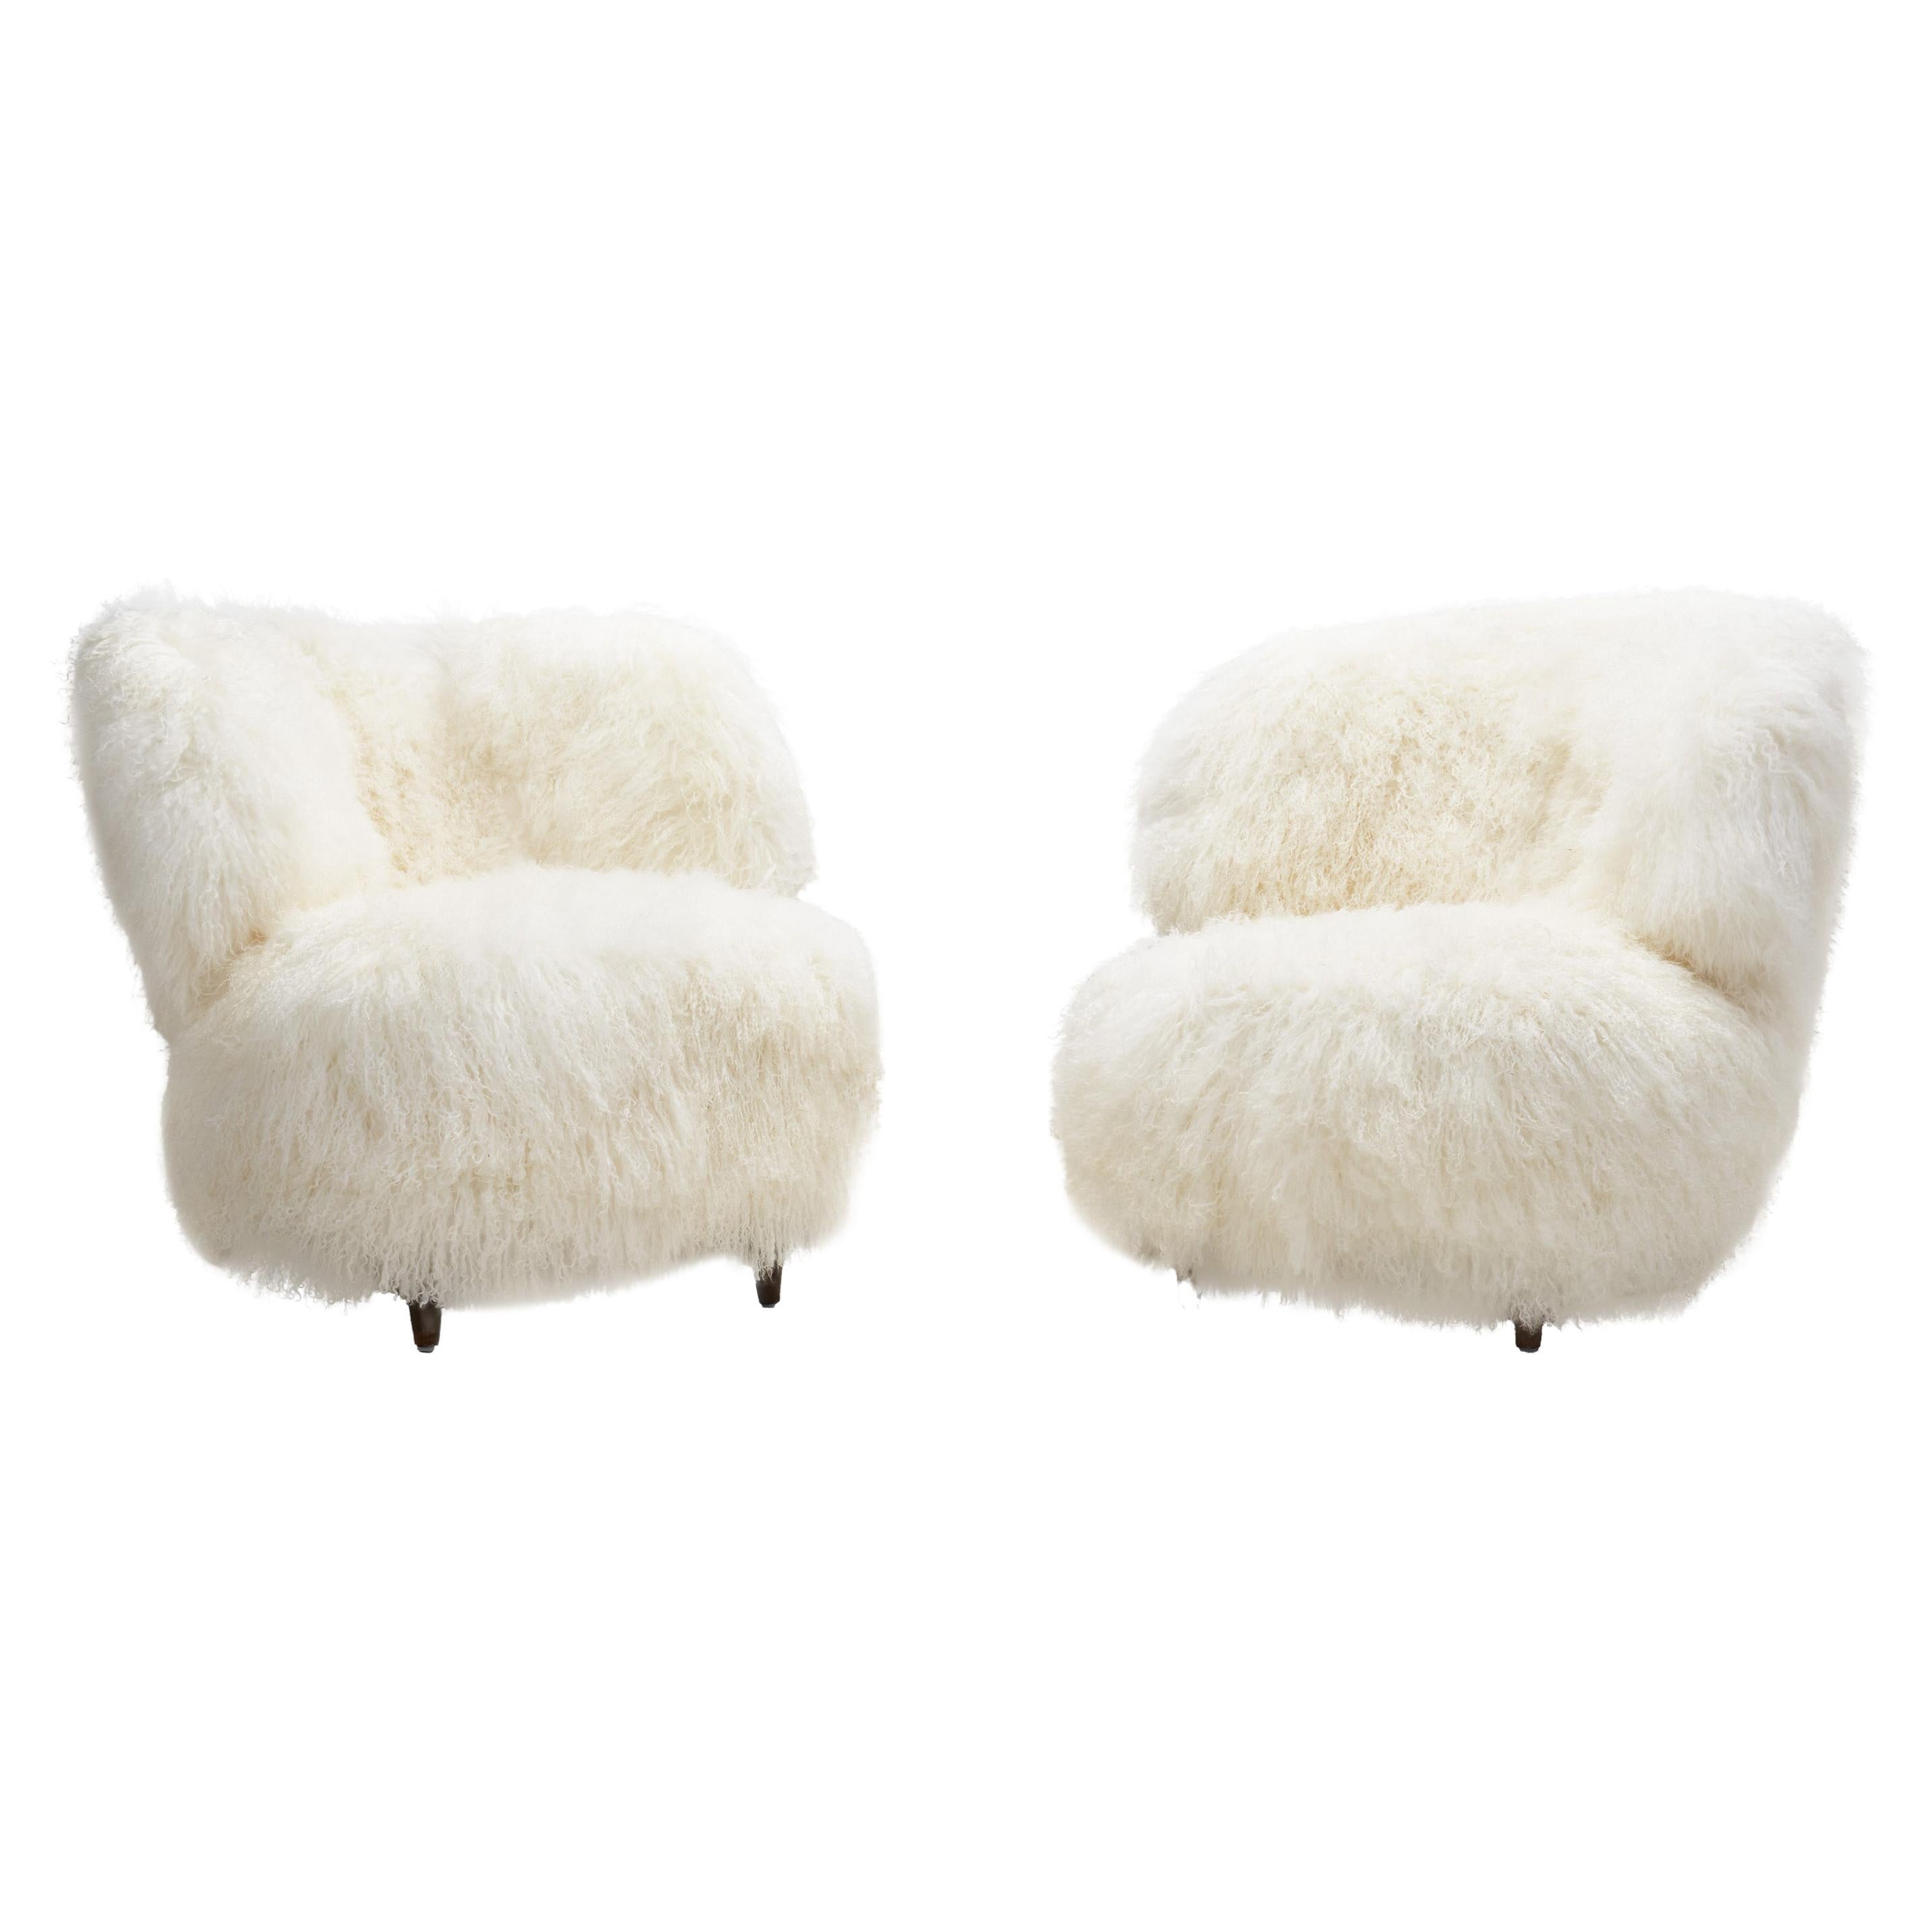 European Easy Chairs in Lush Shearling, Europe 1950s For Sale